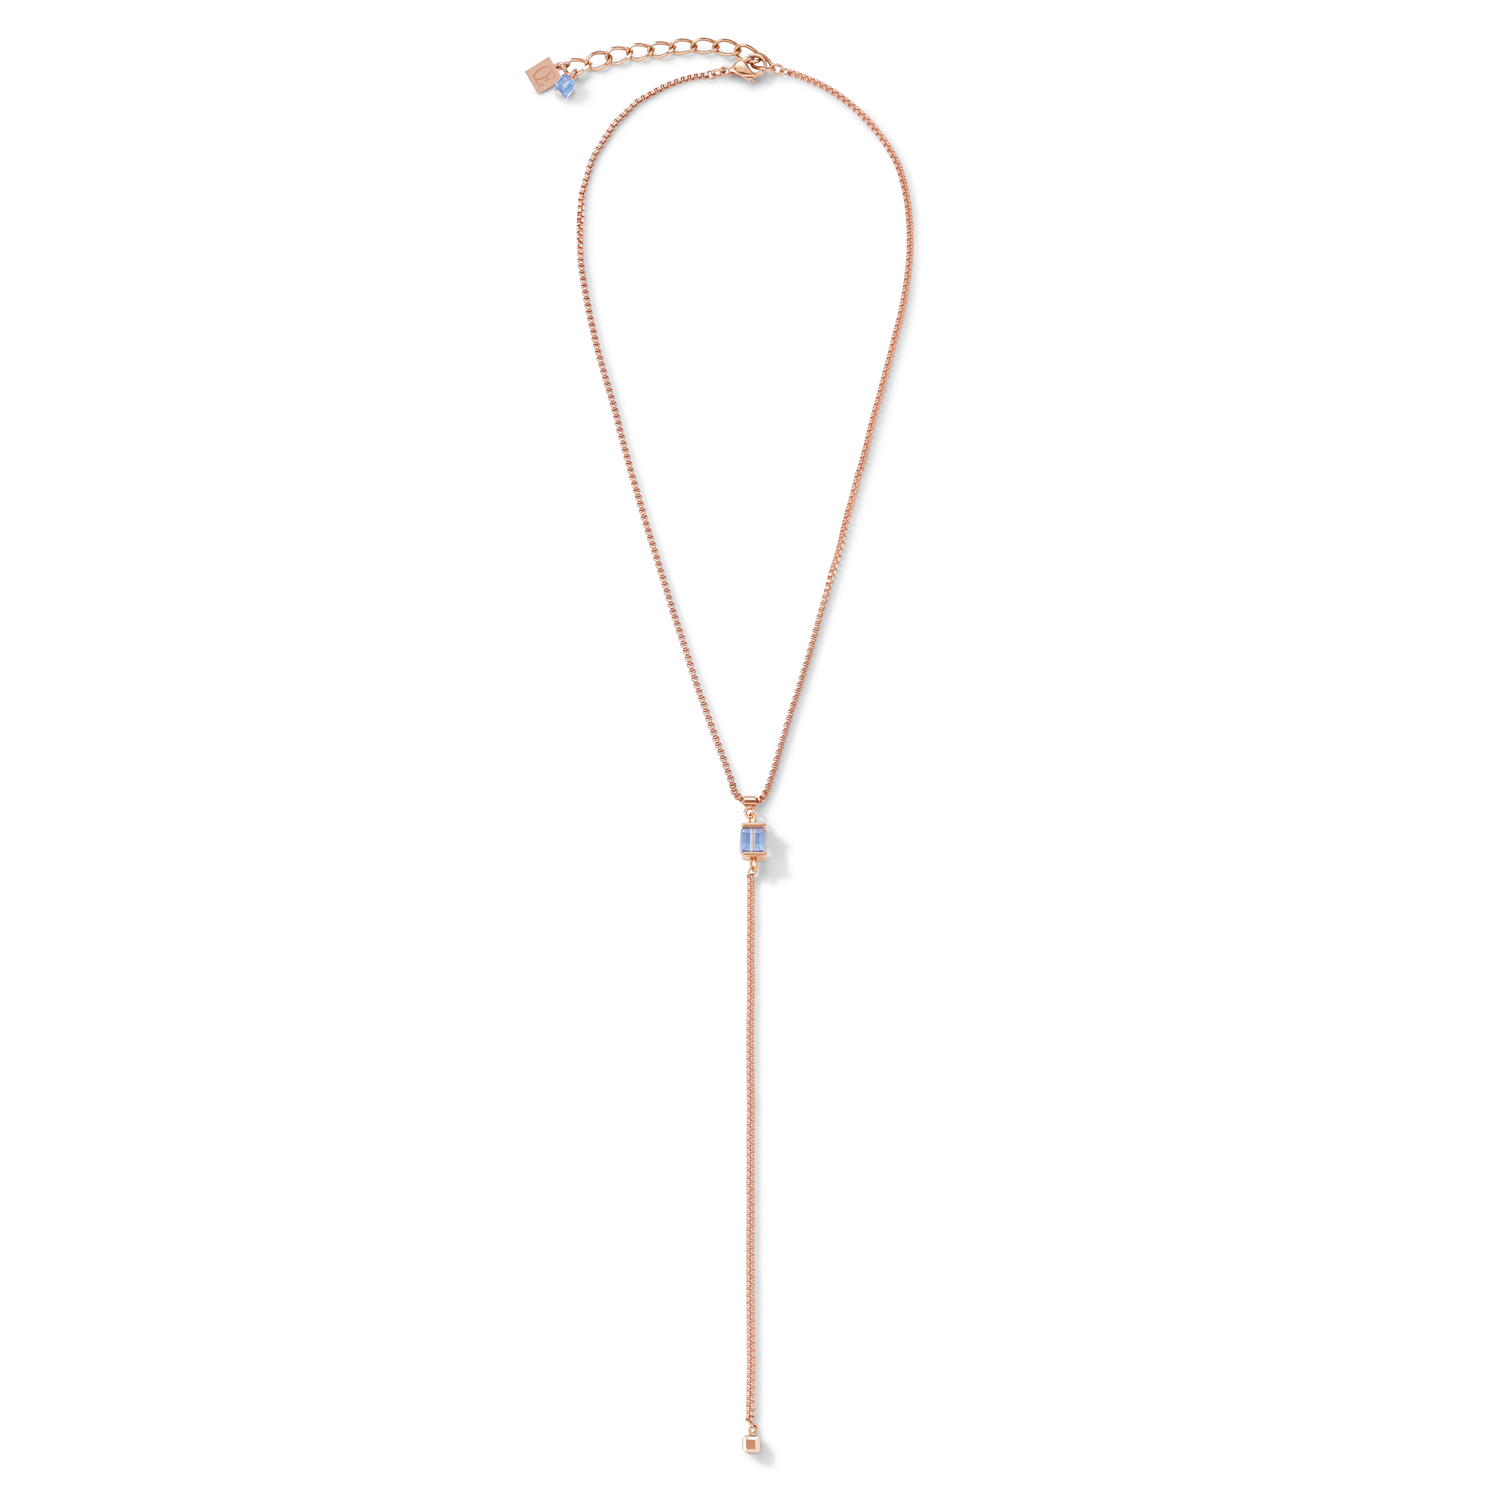 Necklace Stainless Steel rose gold & Crystals light blue